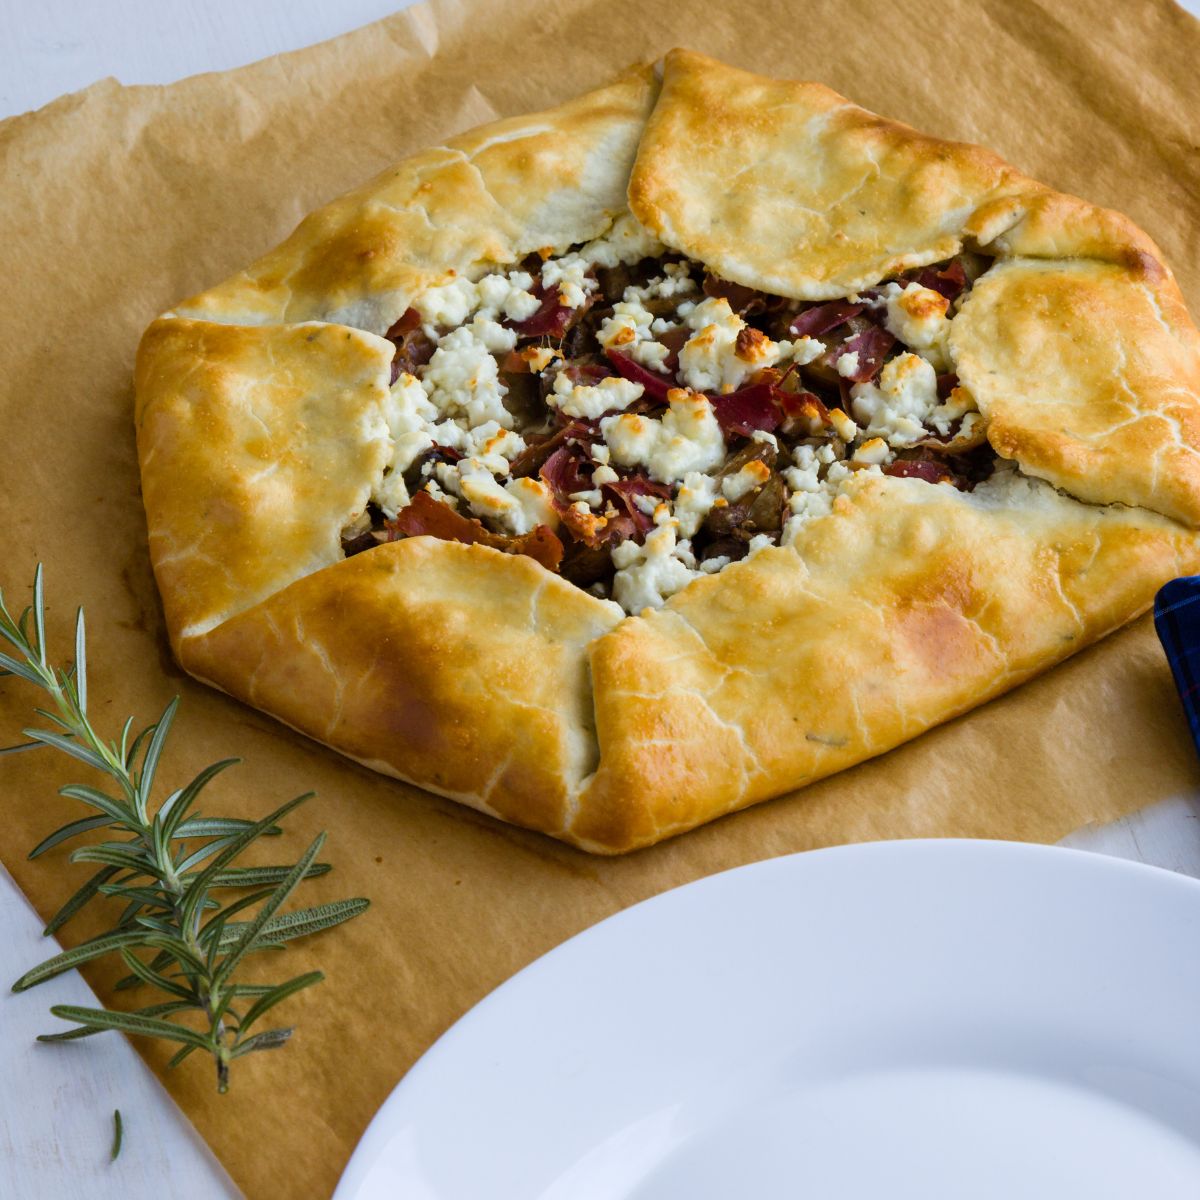 Oyster Mushroom galette with cheese and a golden crust laid upon brown parchment paper